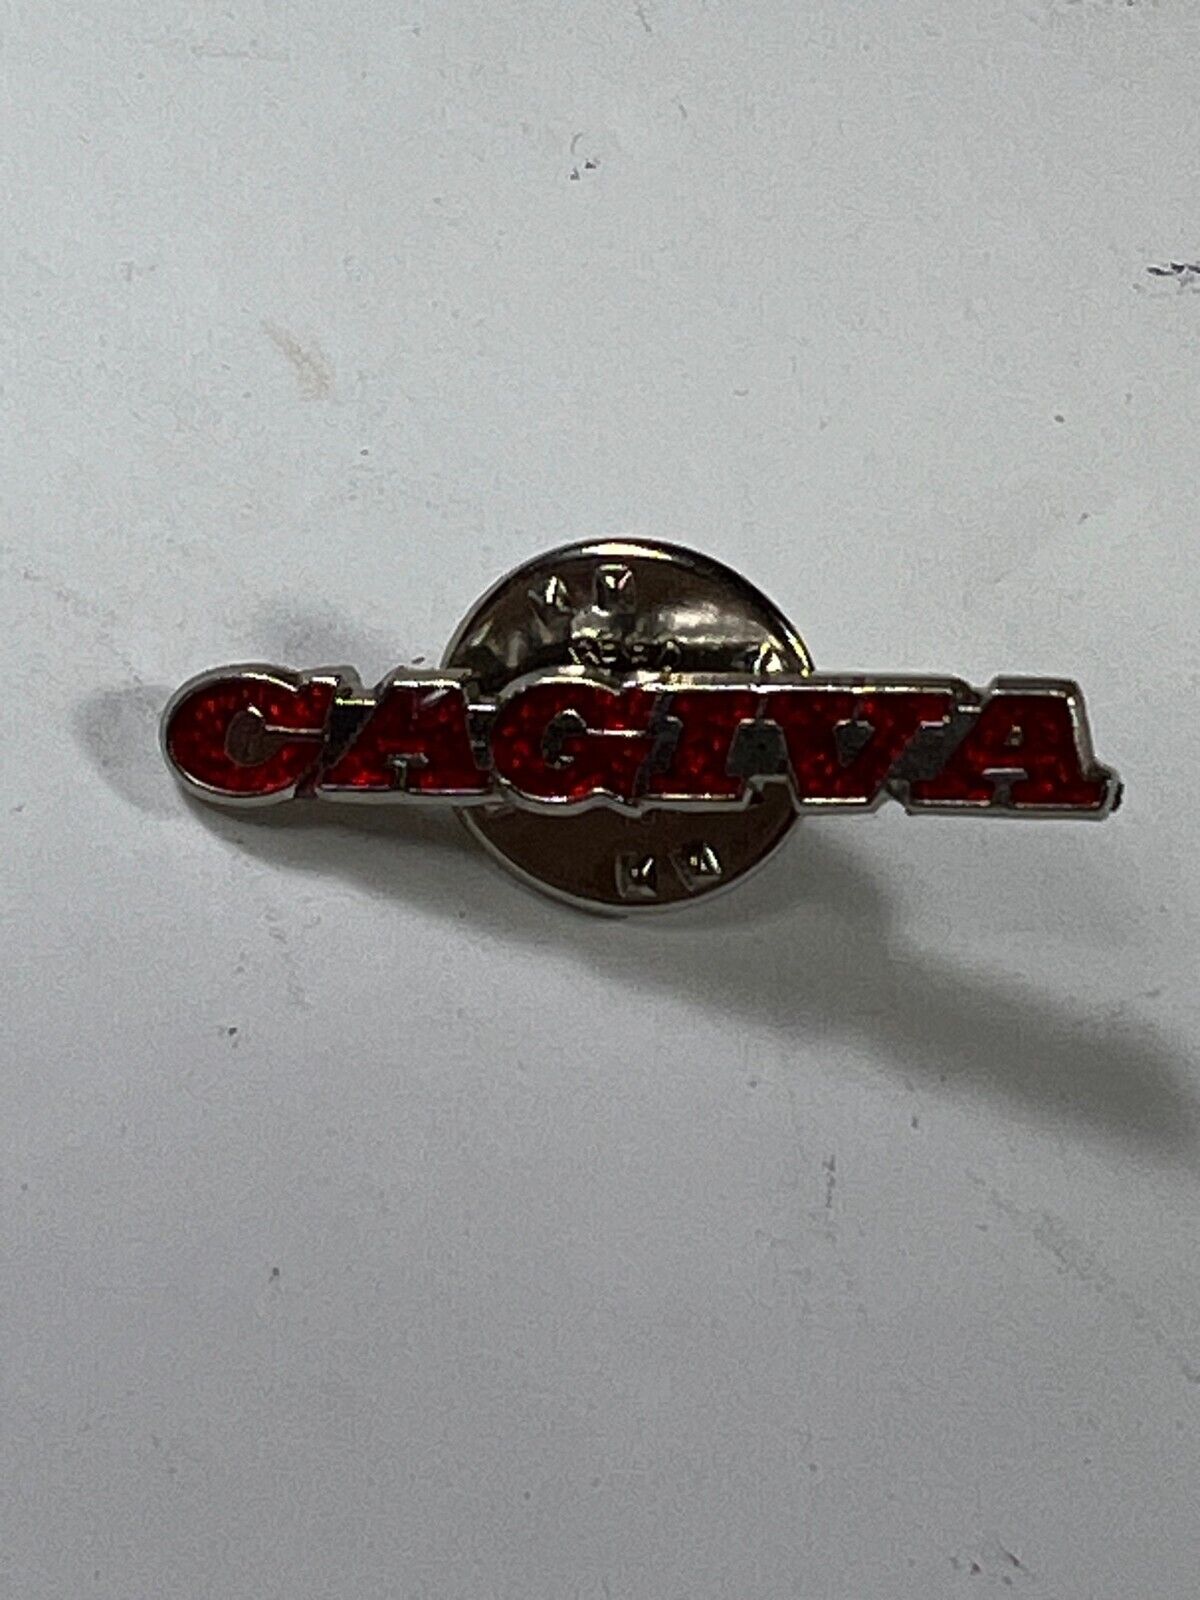 Vintage Cagiva Bike Lapel Hat Pin classic Italian motorcycle scooter